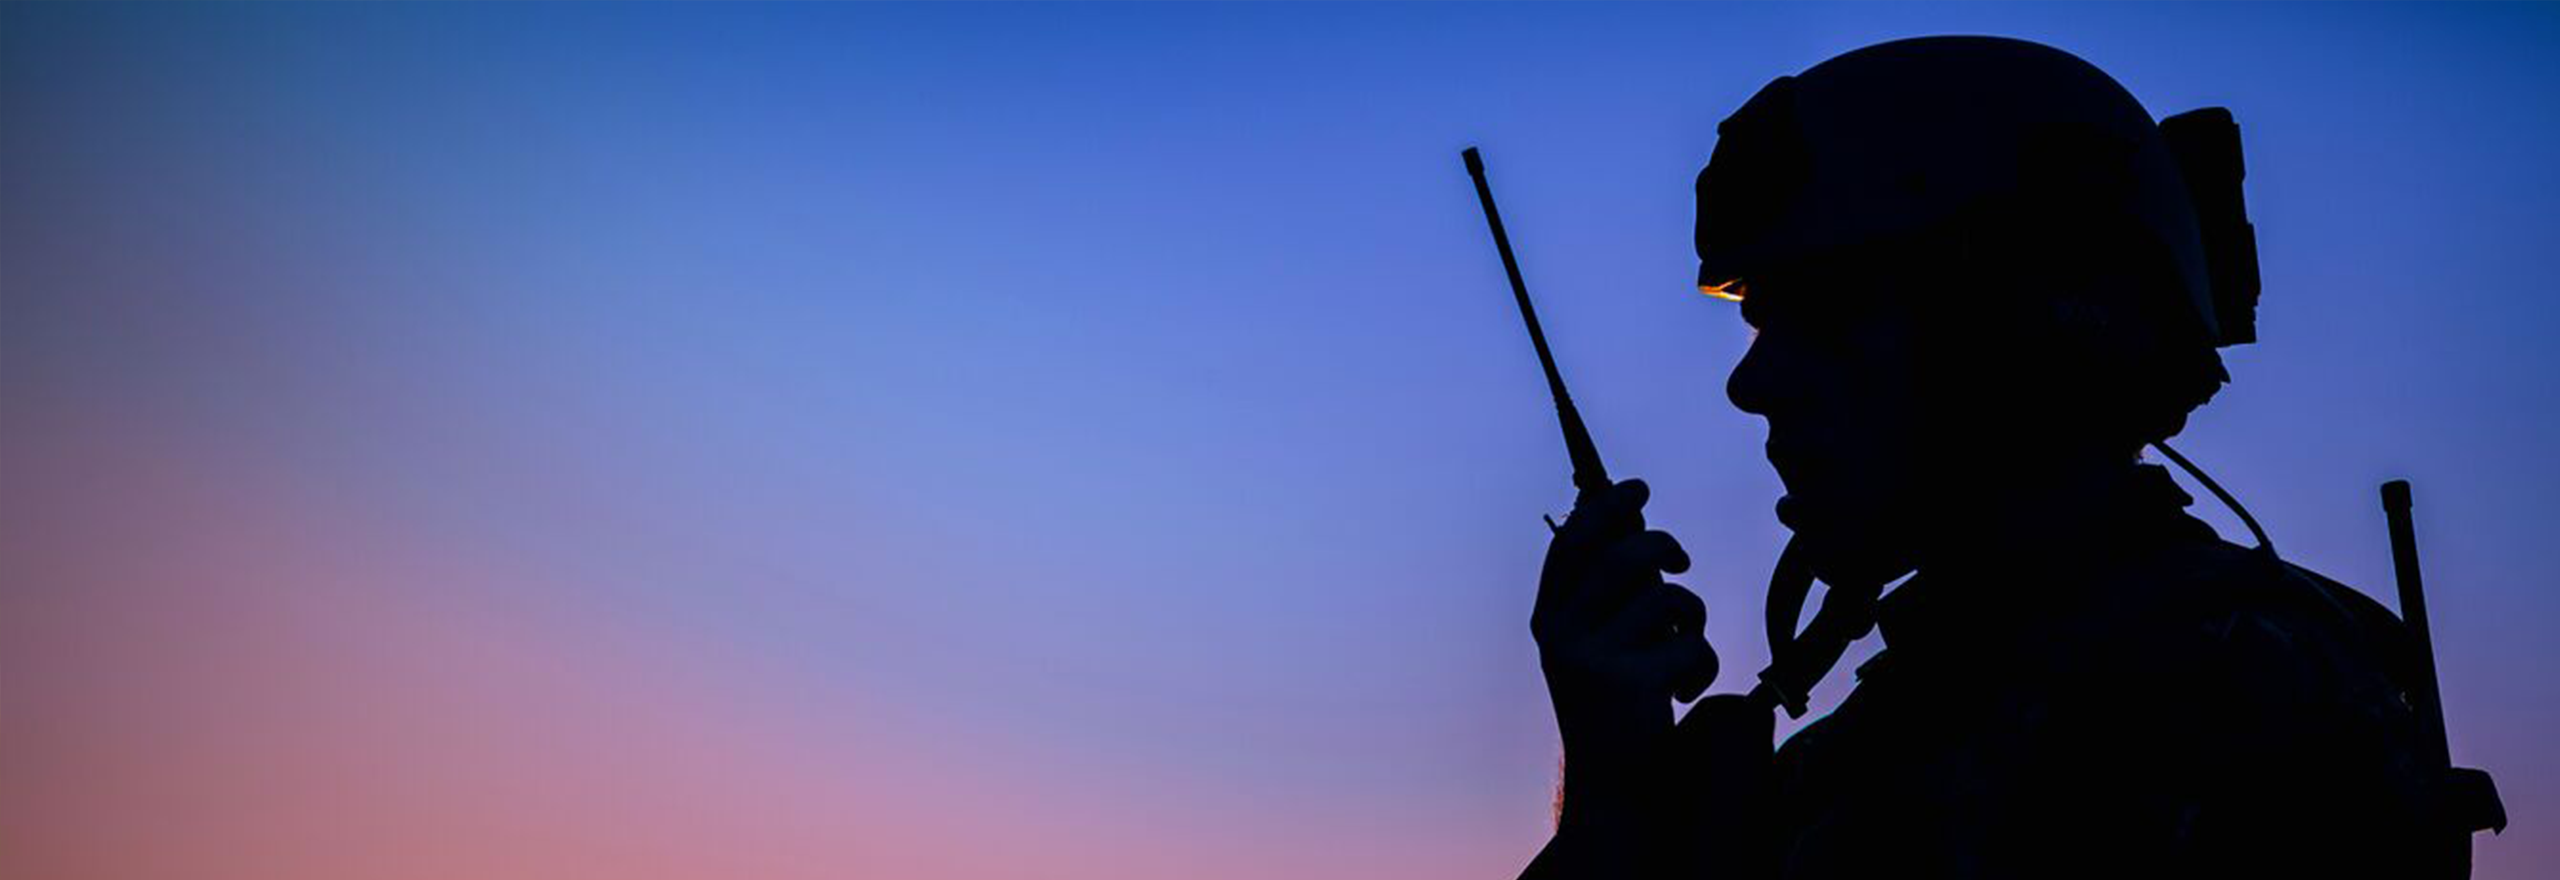 silhouette of soldier using radio